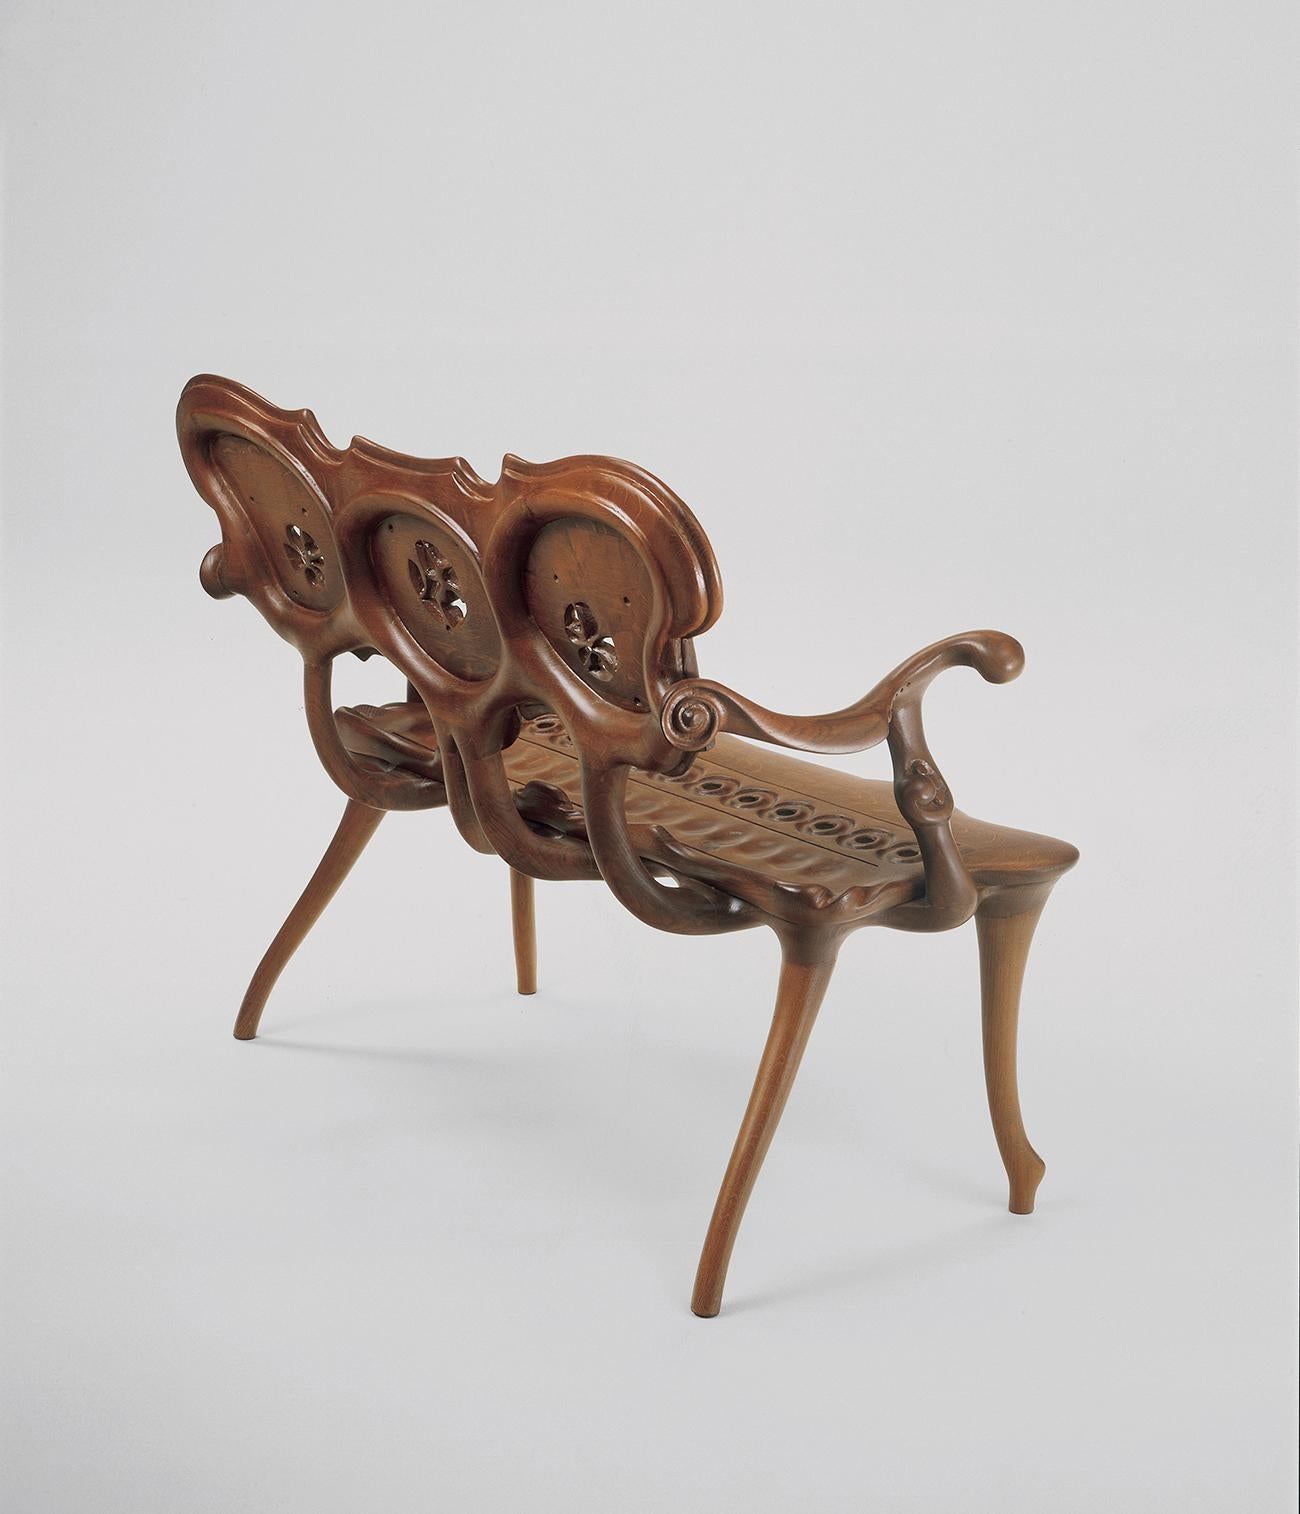 Calvet bench, Antonio Gaudí
1902
Dimensions: 118 x 54 x 95 cm
Materials: solid oak varnished

Solid dark varnished oak 

Antoni Gaudí (1852/1926) is, without doubt, the most internationally well-known Spanish architect. But is not only his